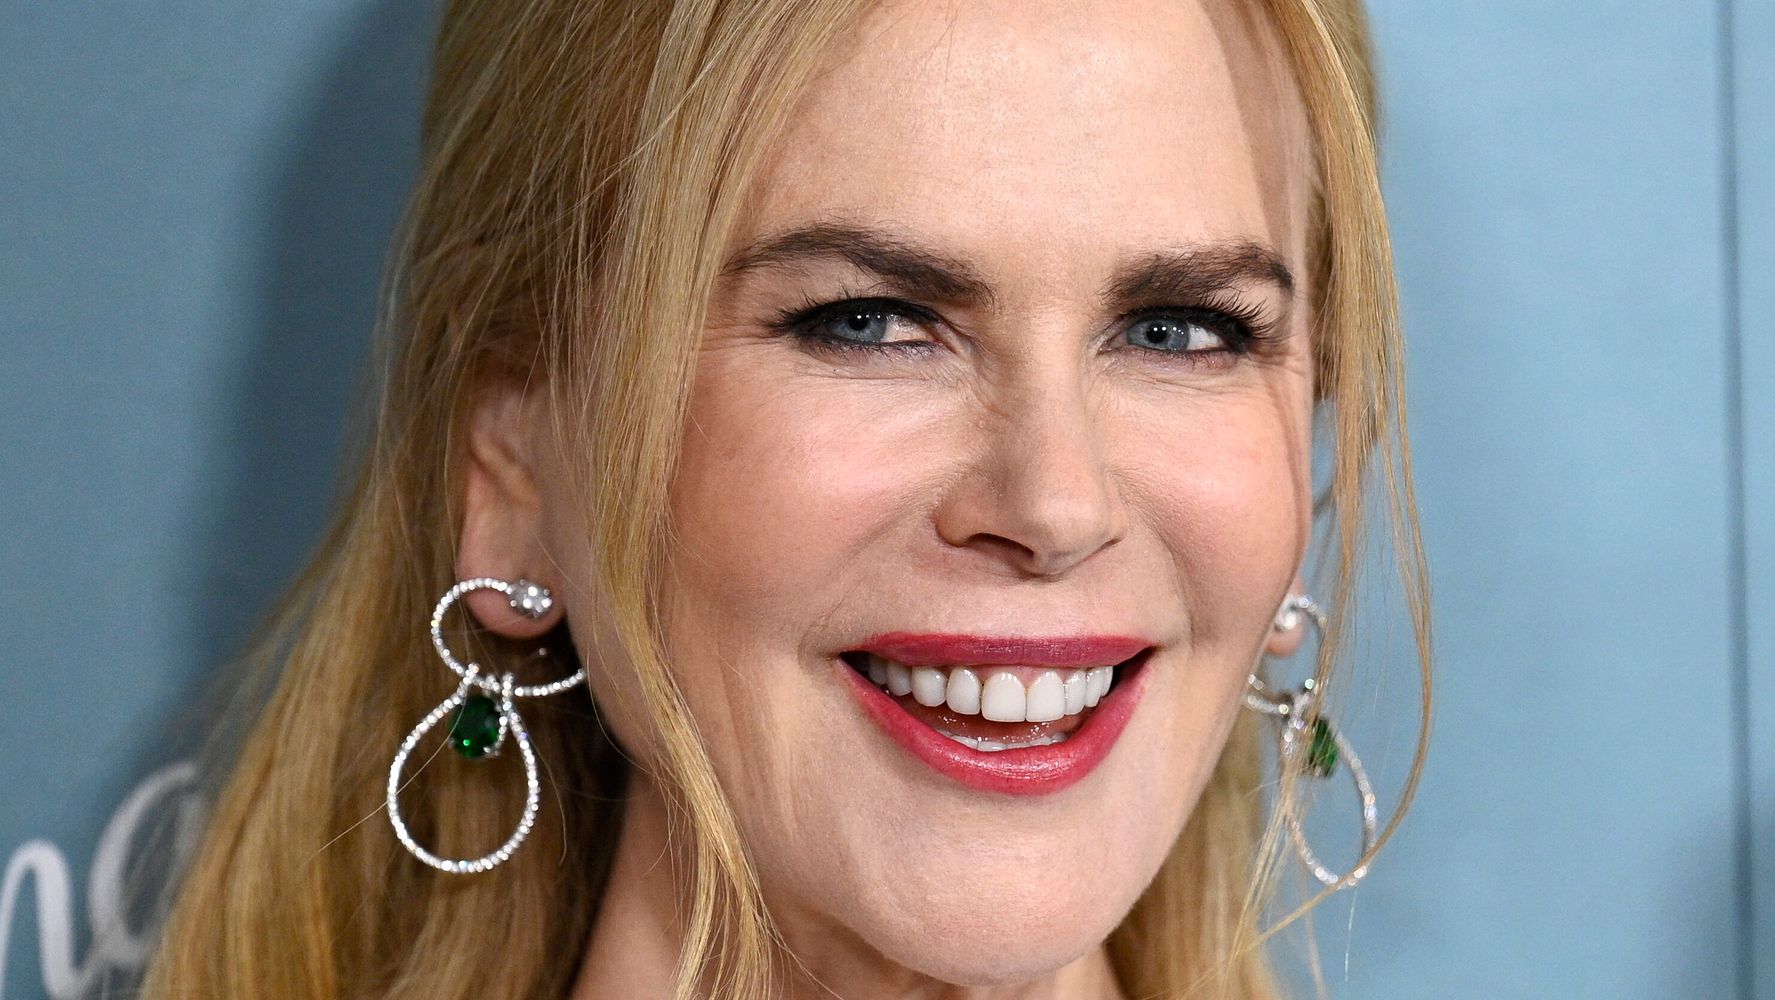 Nicole Kidman Feared She Was Wrong To Play Lucille Ball, Almost Quit Movie | HuffPost Entertainment